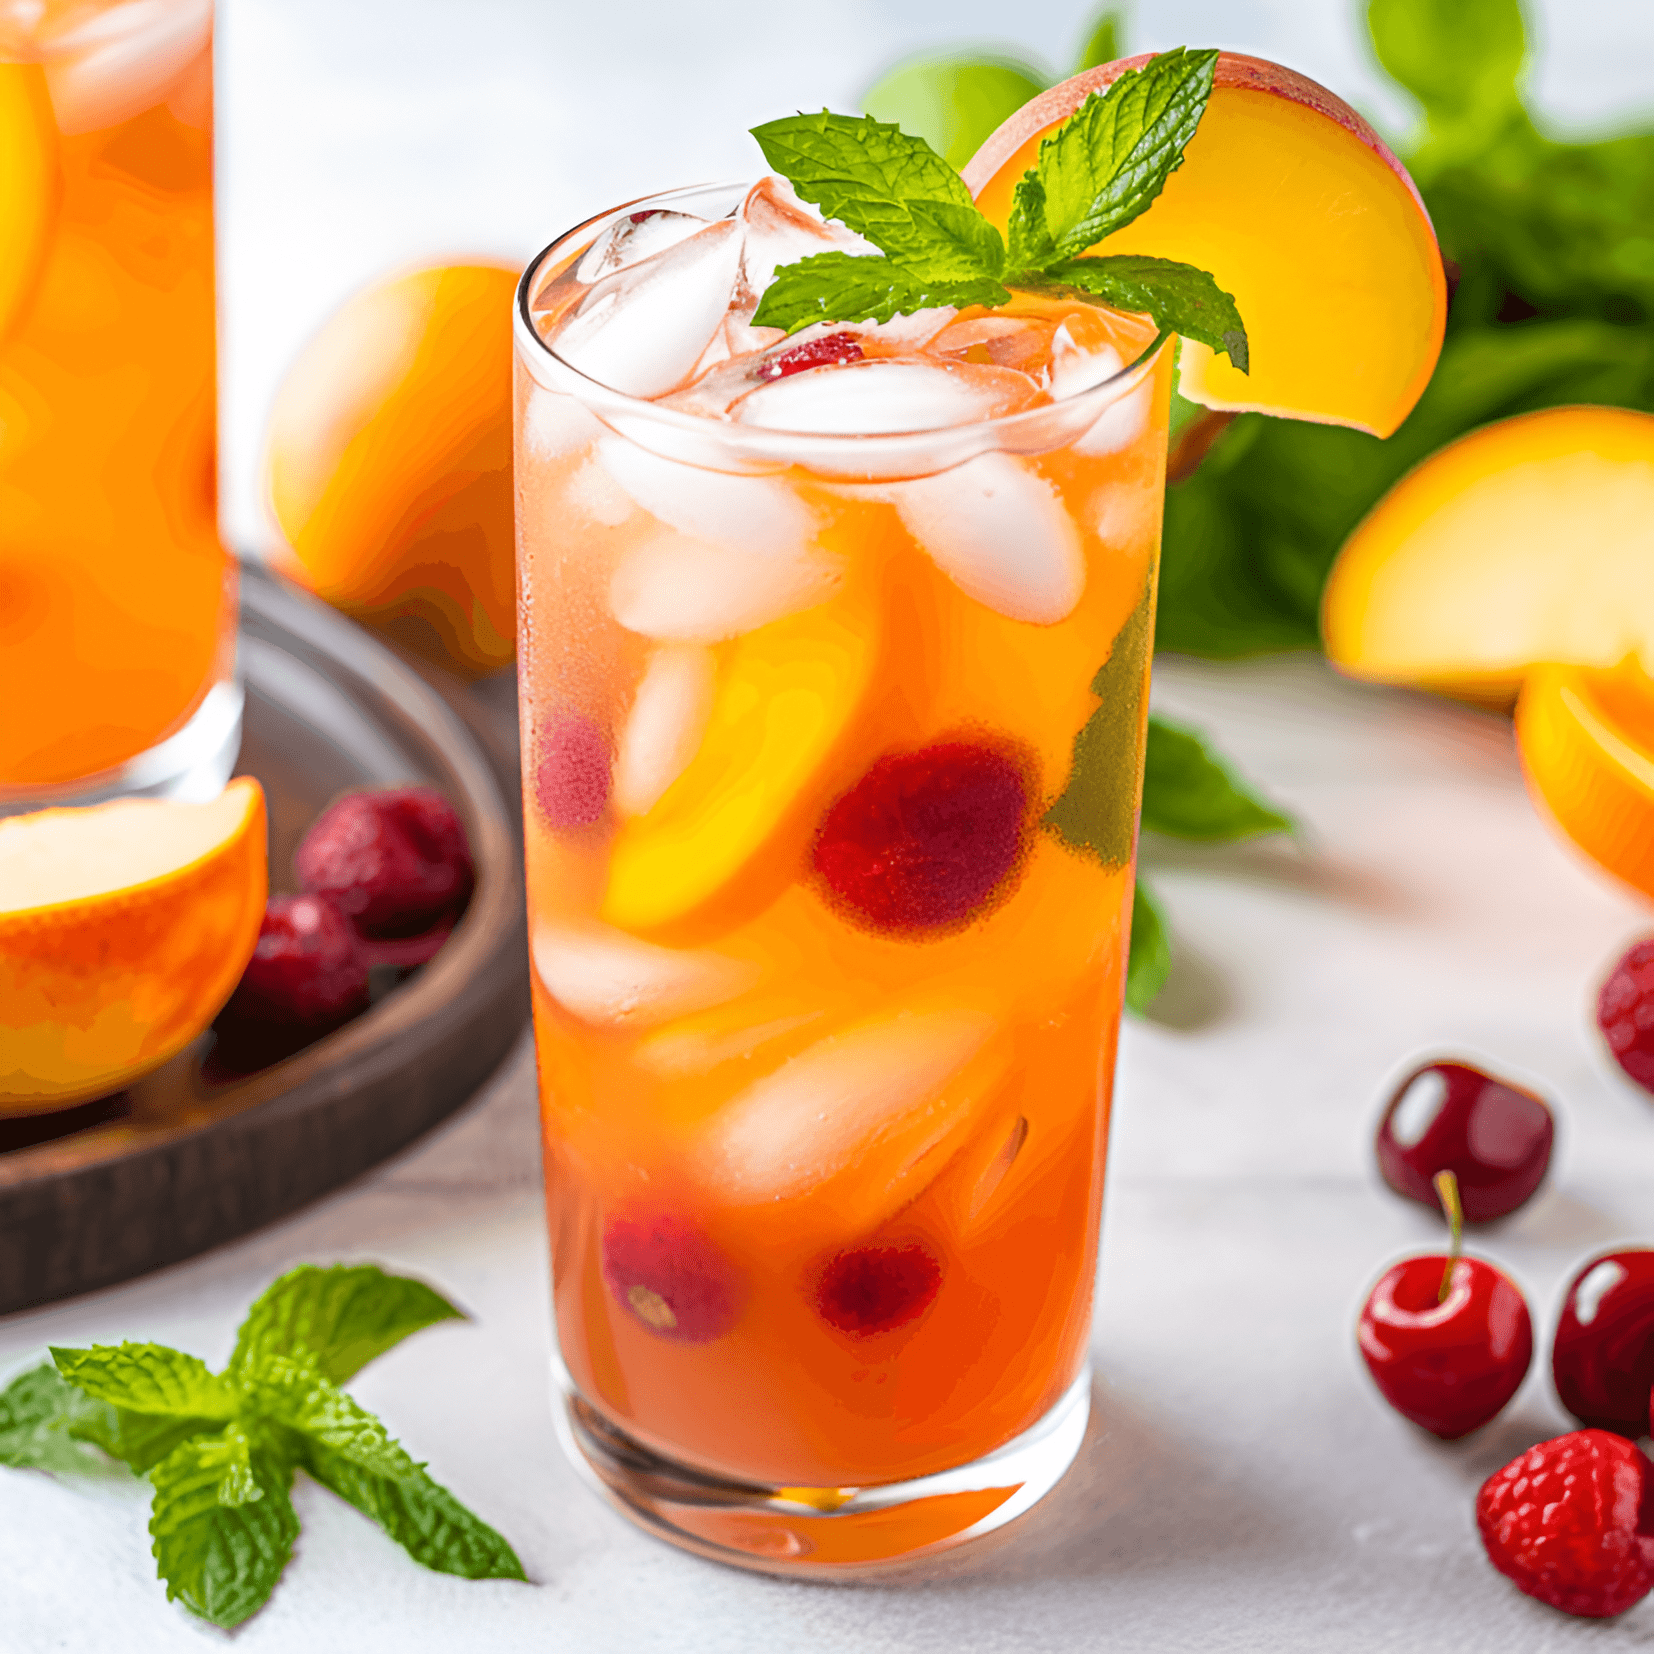 Georgia Peach Cocktail Recipe - The Georgia Peach cocktail is a delicious blend of sweet, fruity, and slightly tart flavors. The peach schnapps and orange juice provide a sweet and juicy base, while the cranberry juice adds a touch of tartness. The vodka gives it a smooth and subtle kick, making it a well-balanced and refreshing drink.